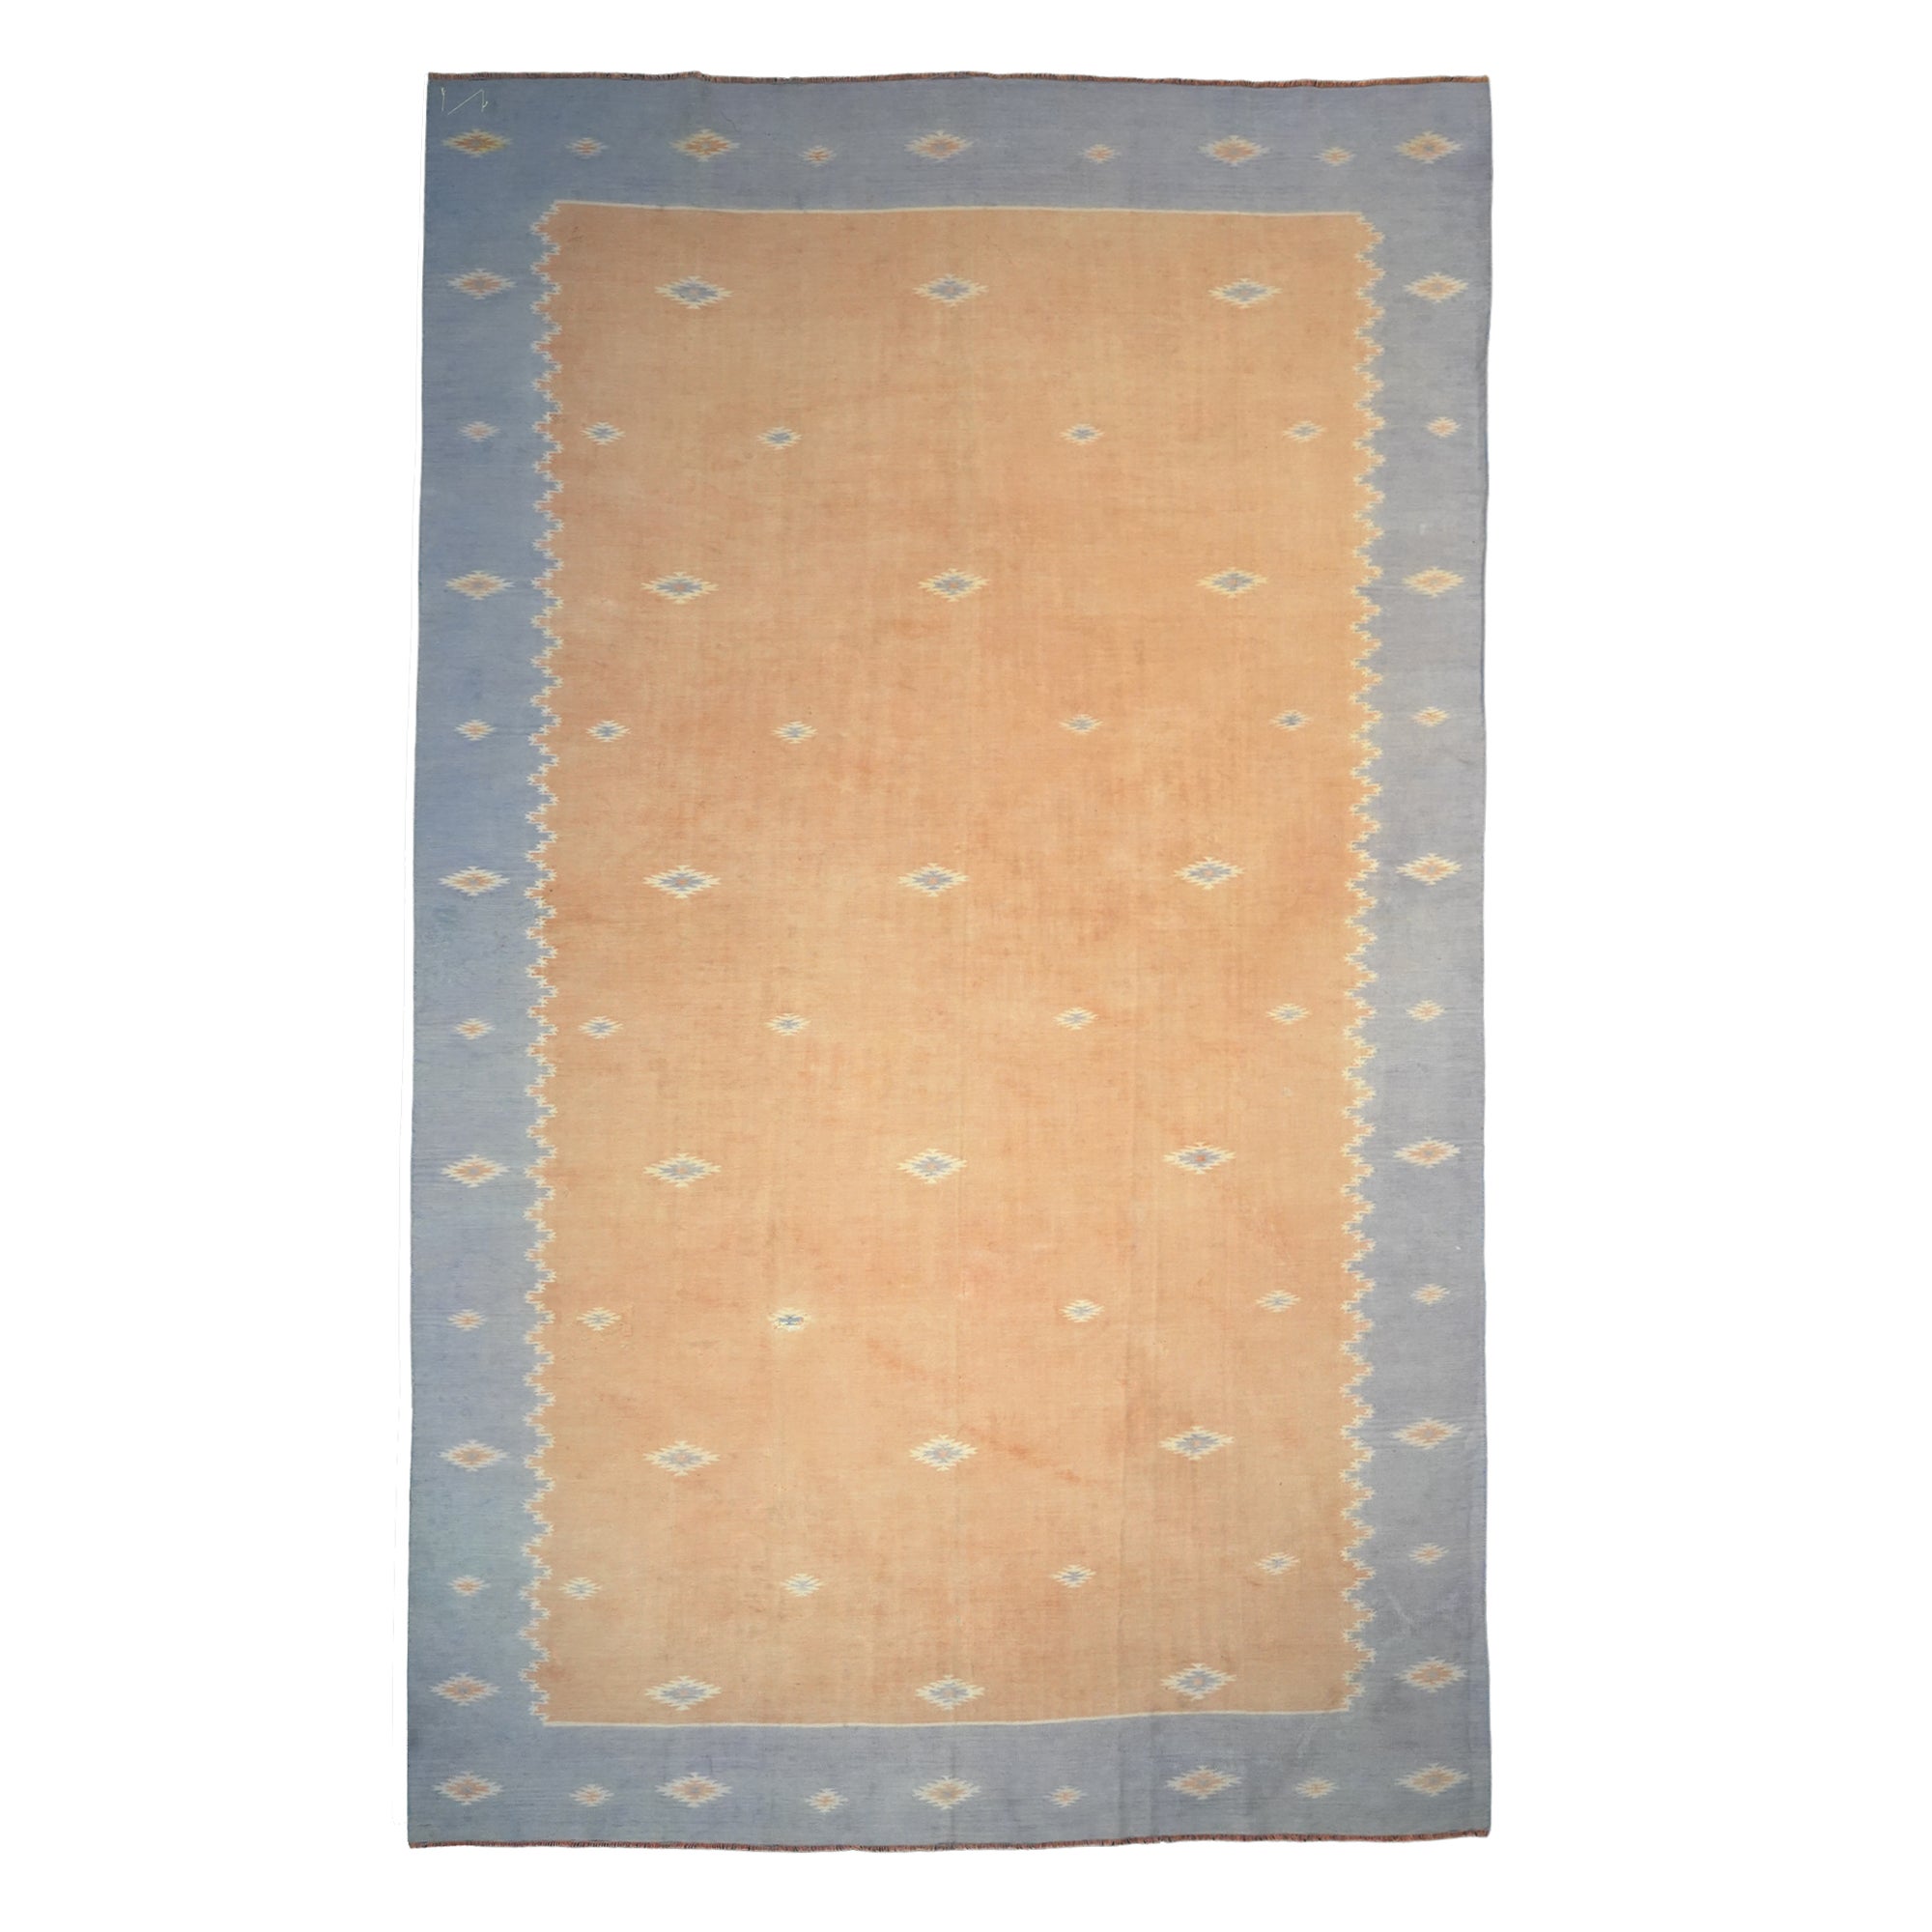 Vintage Dhurrie Rug, with All-Over Geometric Patterns, from Rug & Kilim For Sale